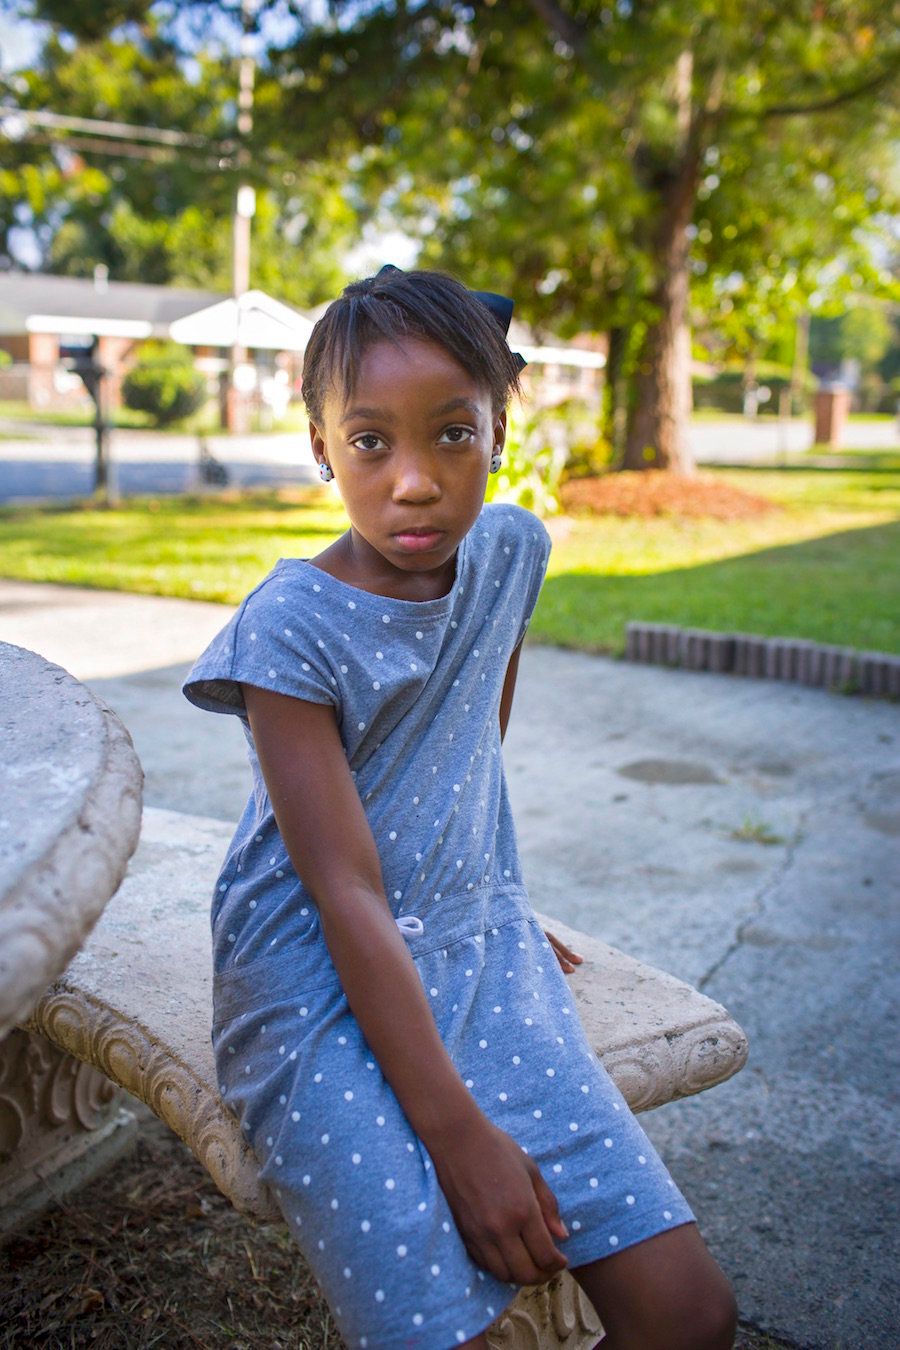 "Eight-year-old Taniya was shot by another third-grader in their classroom. The boy had found the gun in his home and brought it to school." (Augusta, Georgia, 2015.)